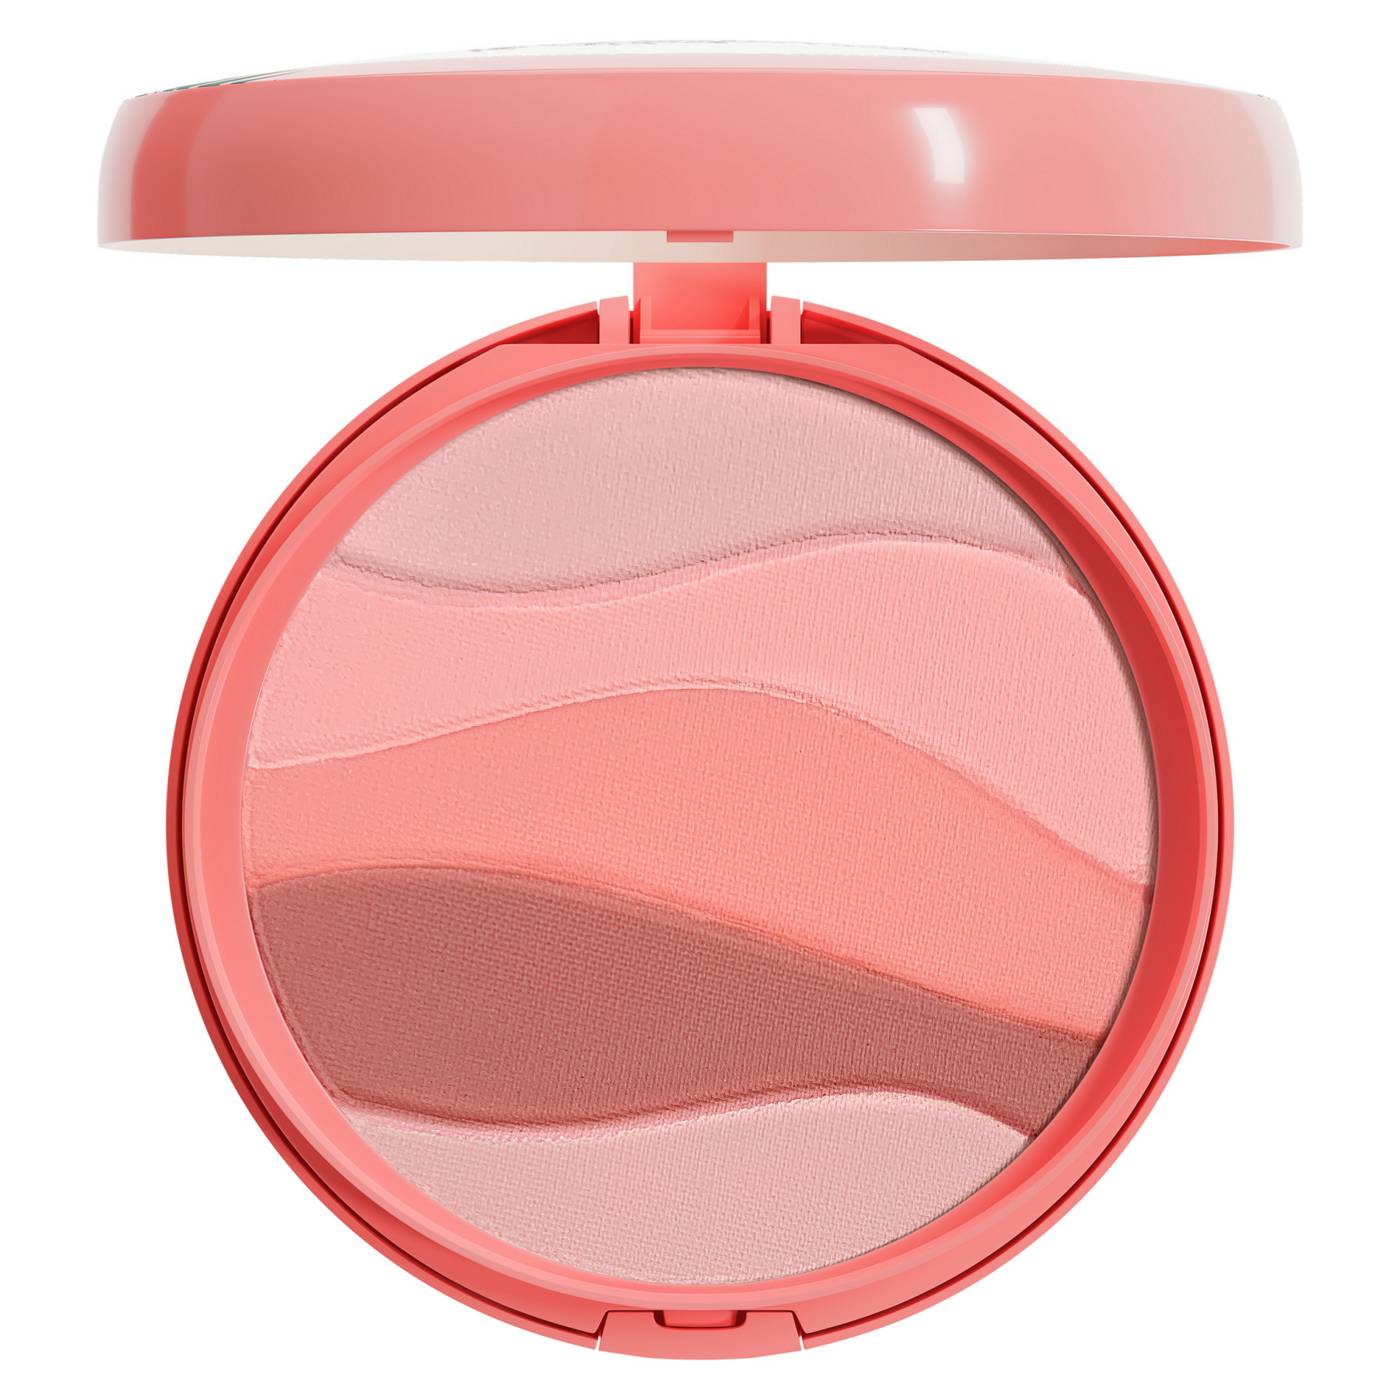 Physicians Formula Butter Believe It! Blush Pink Sands; image 5 of 5